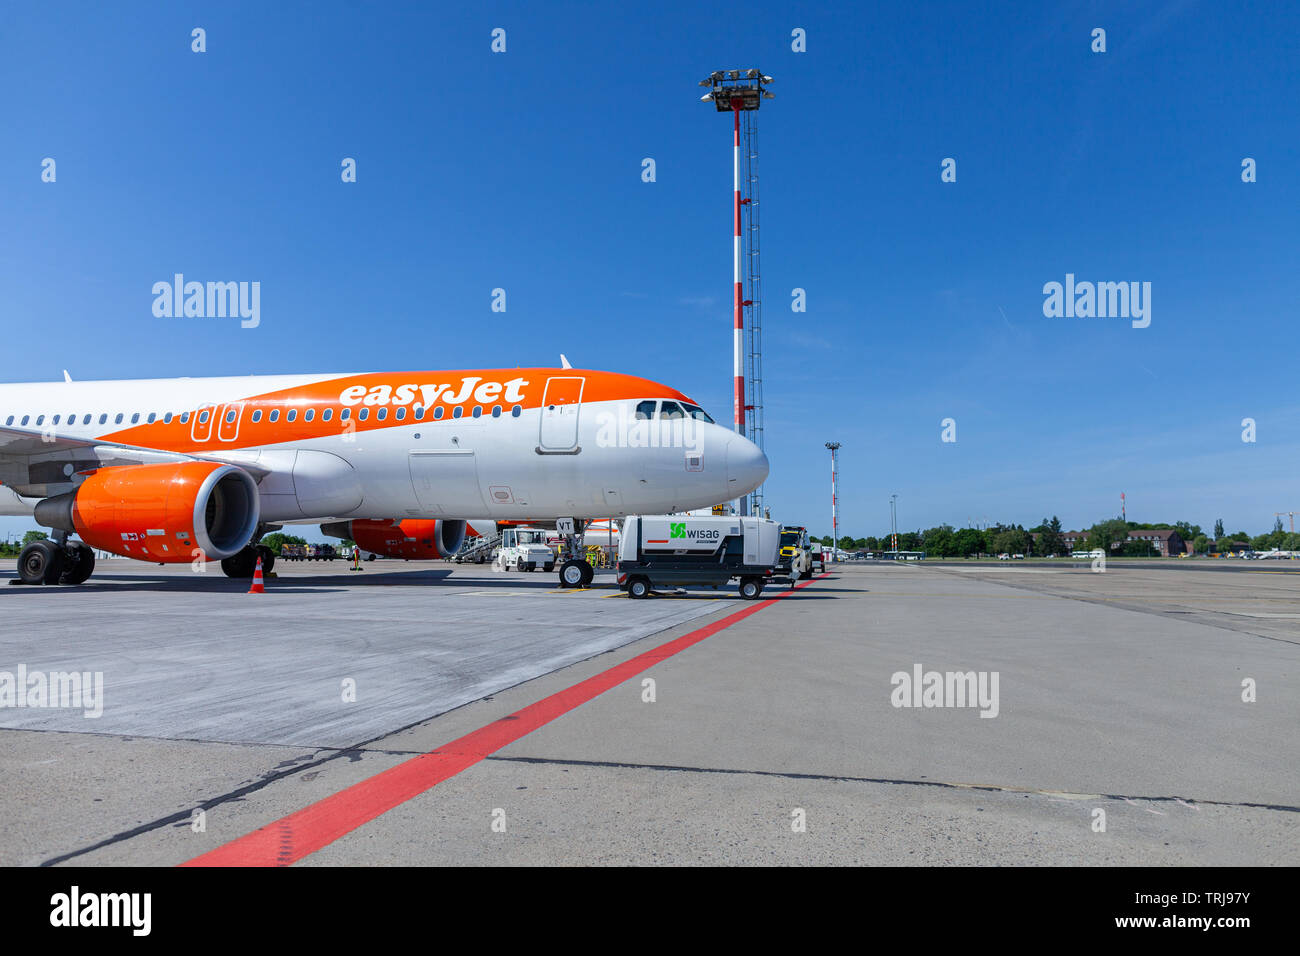 BERLIN SCHONEFELD / GERMANY - MAY 30, 2019: Airbus A320-200 from the easyjet airline stands at airfield on Berlin Schonefeld Airport. Stock Photo